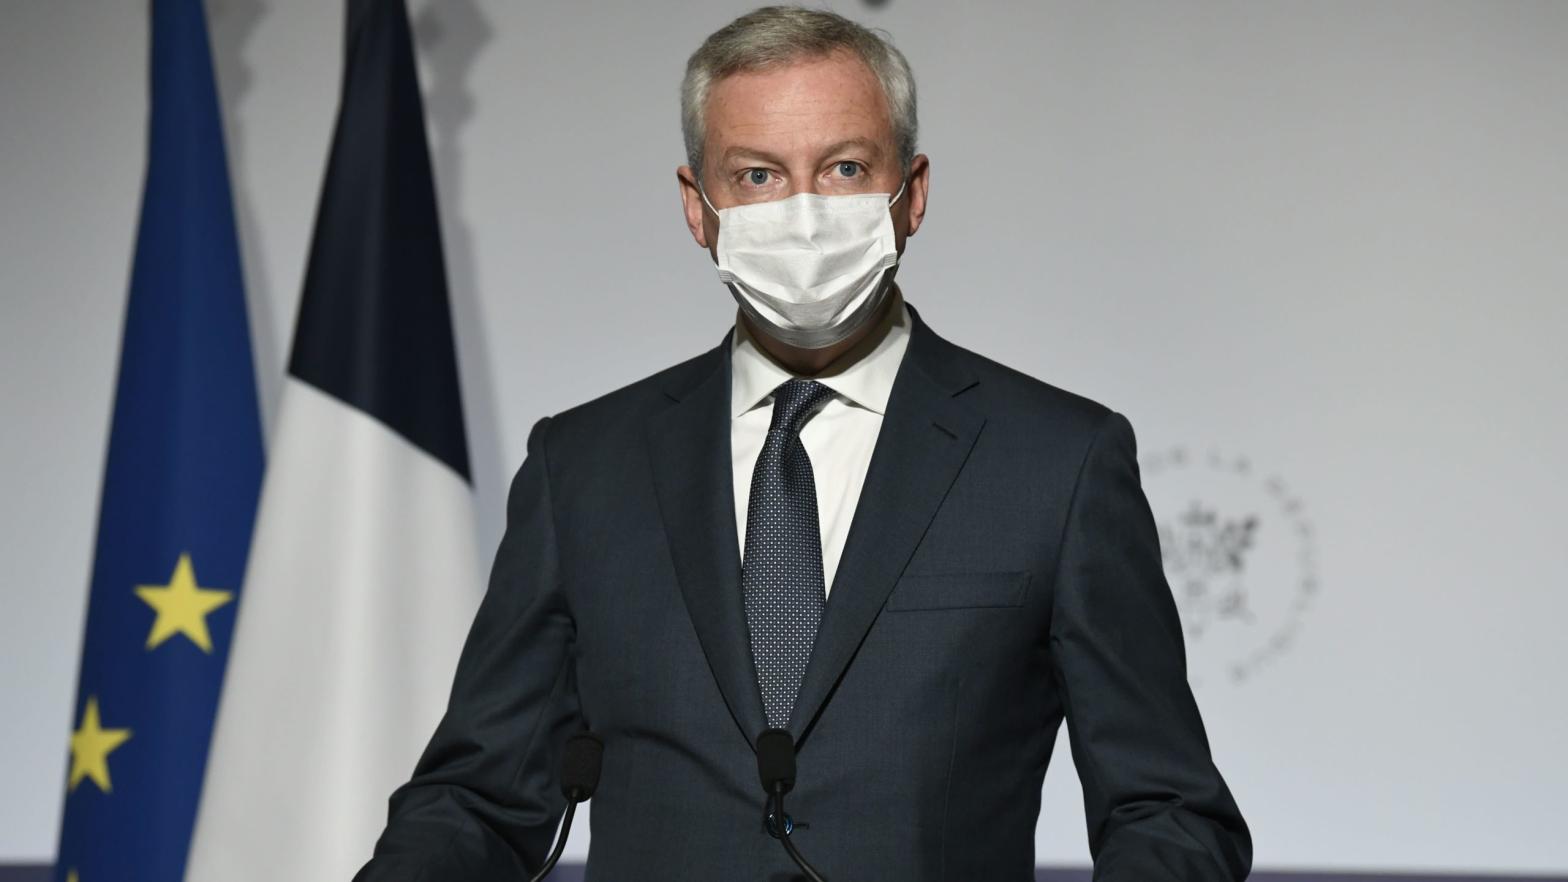 French Economy and Finance Minister Bruno Le Maire at a press conference outside the Elysee Presidential Palace in Paris in September 2020. (Photo: Bertrand Guay, Getty Images)